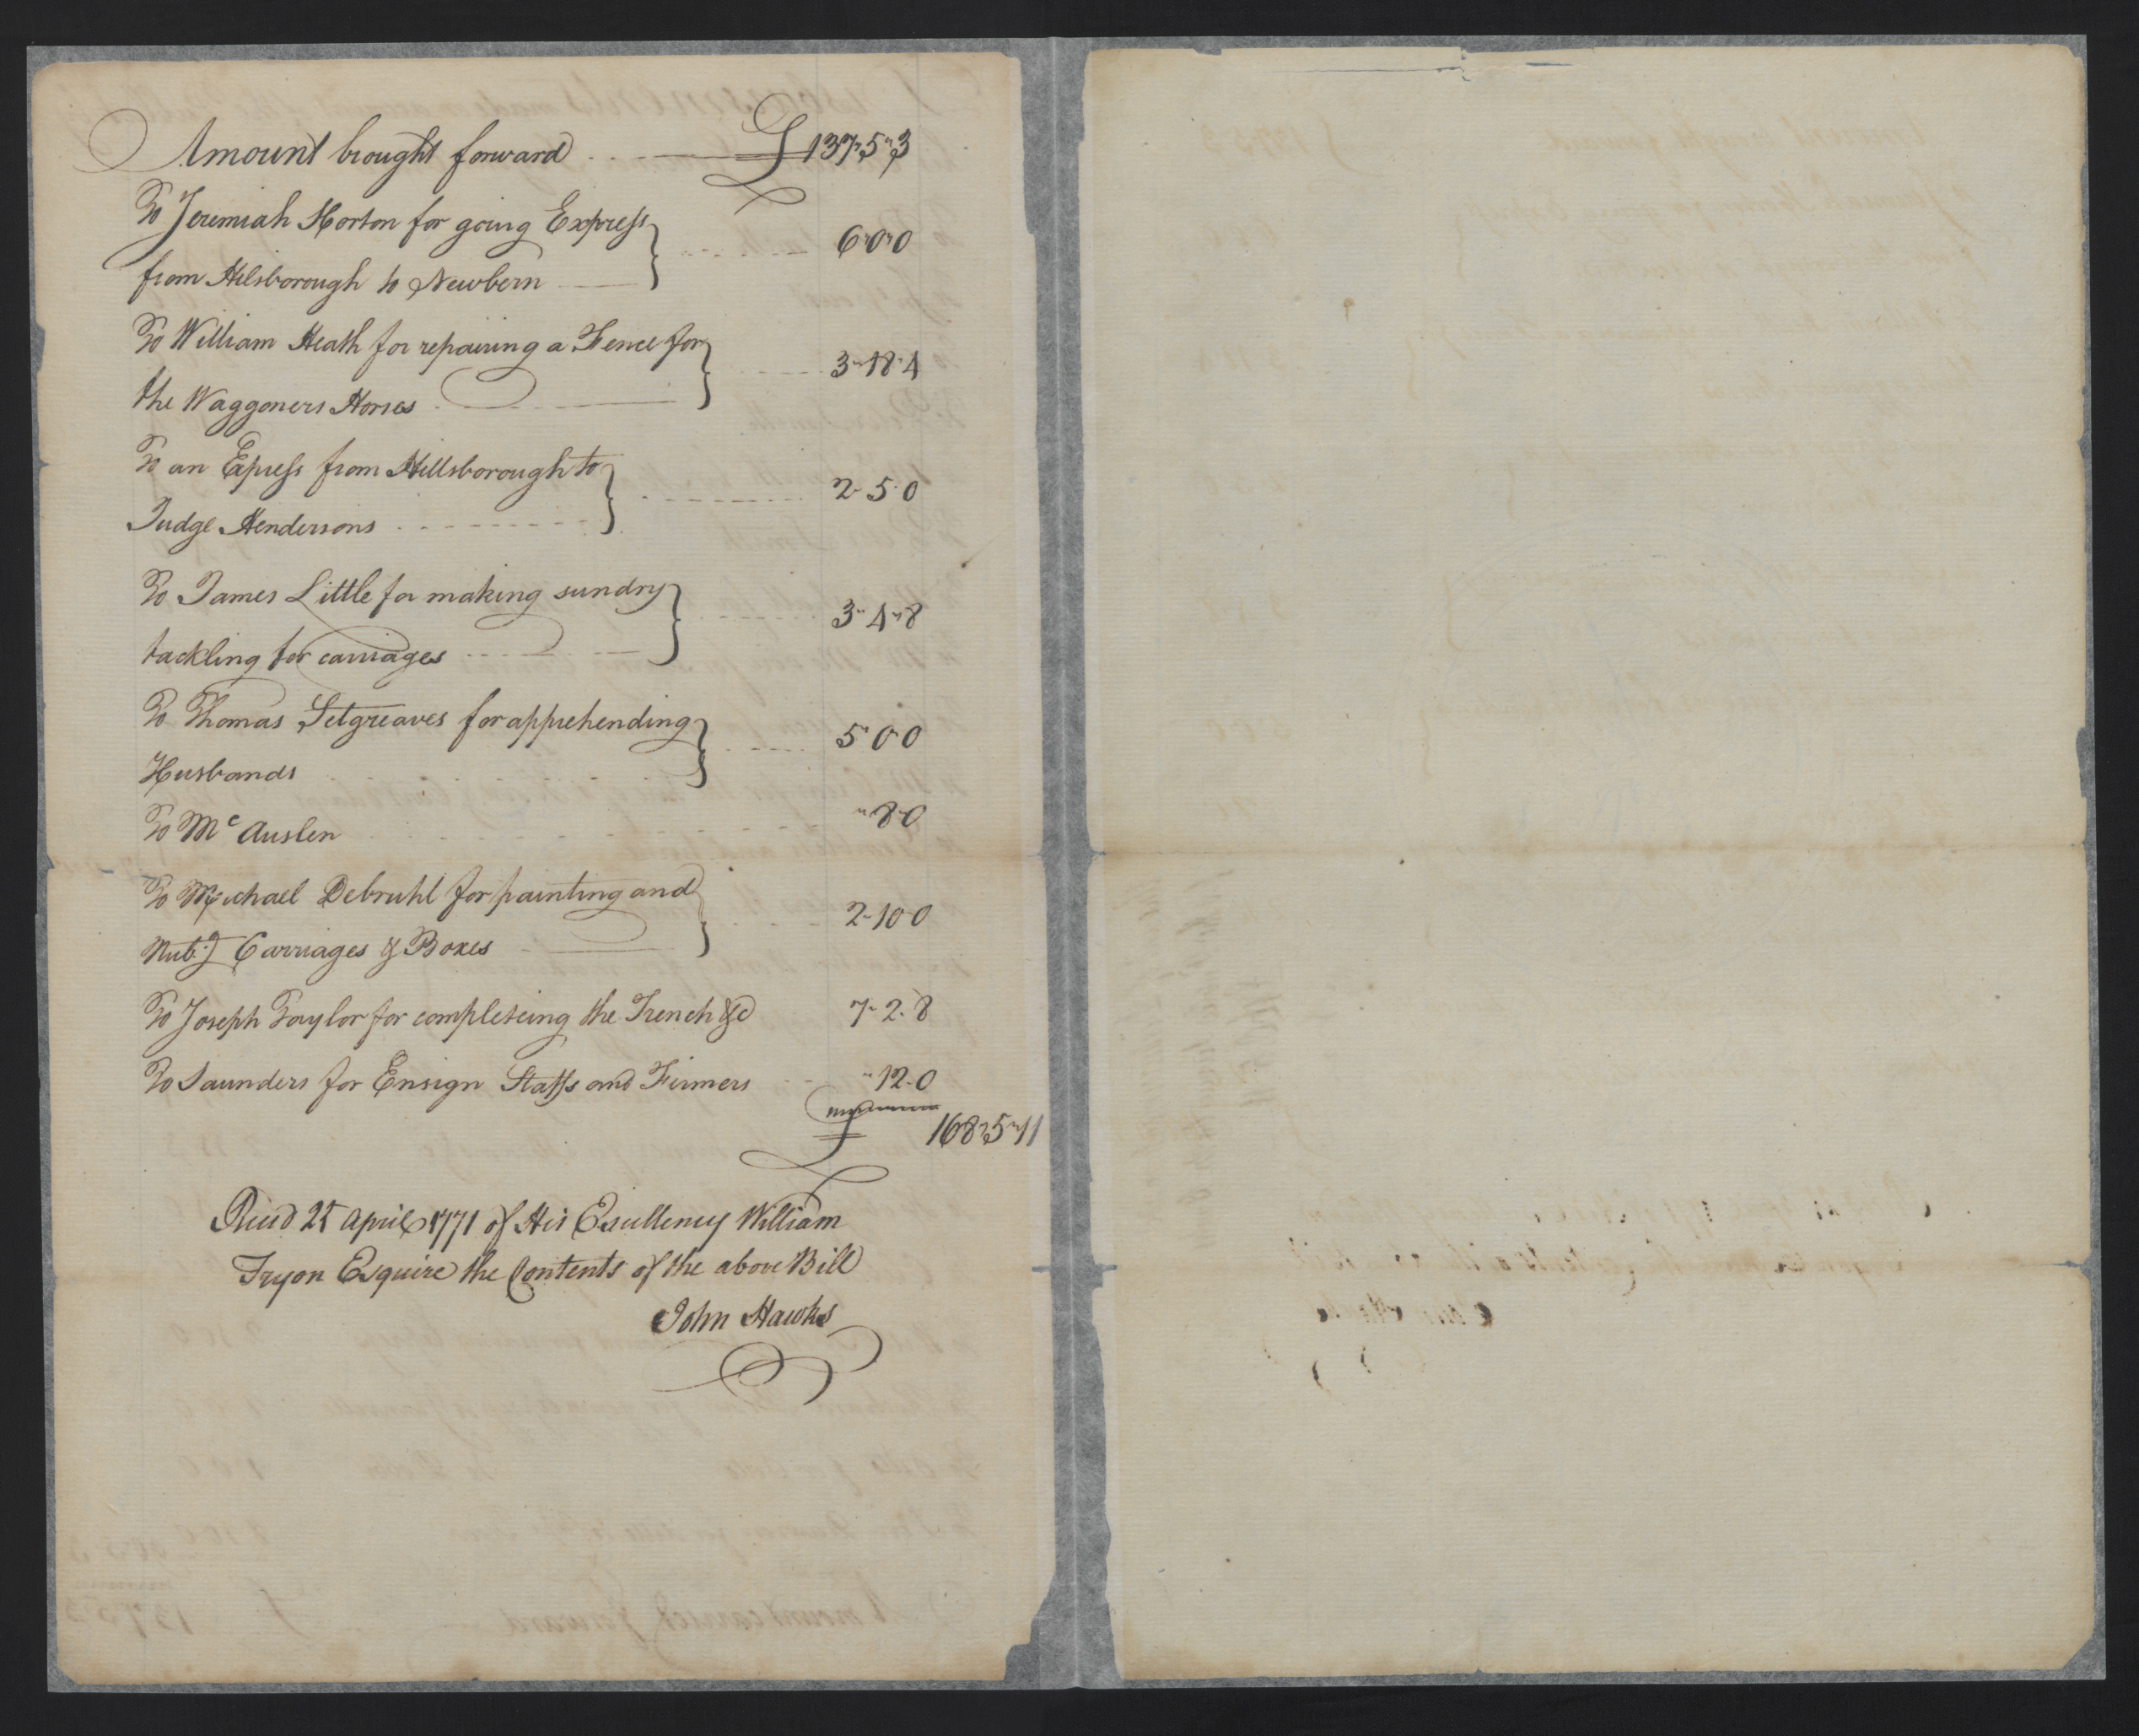 Account of Payments from William Tryon, April 25 1771, page 2.